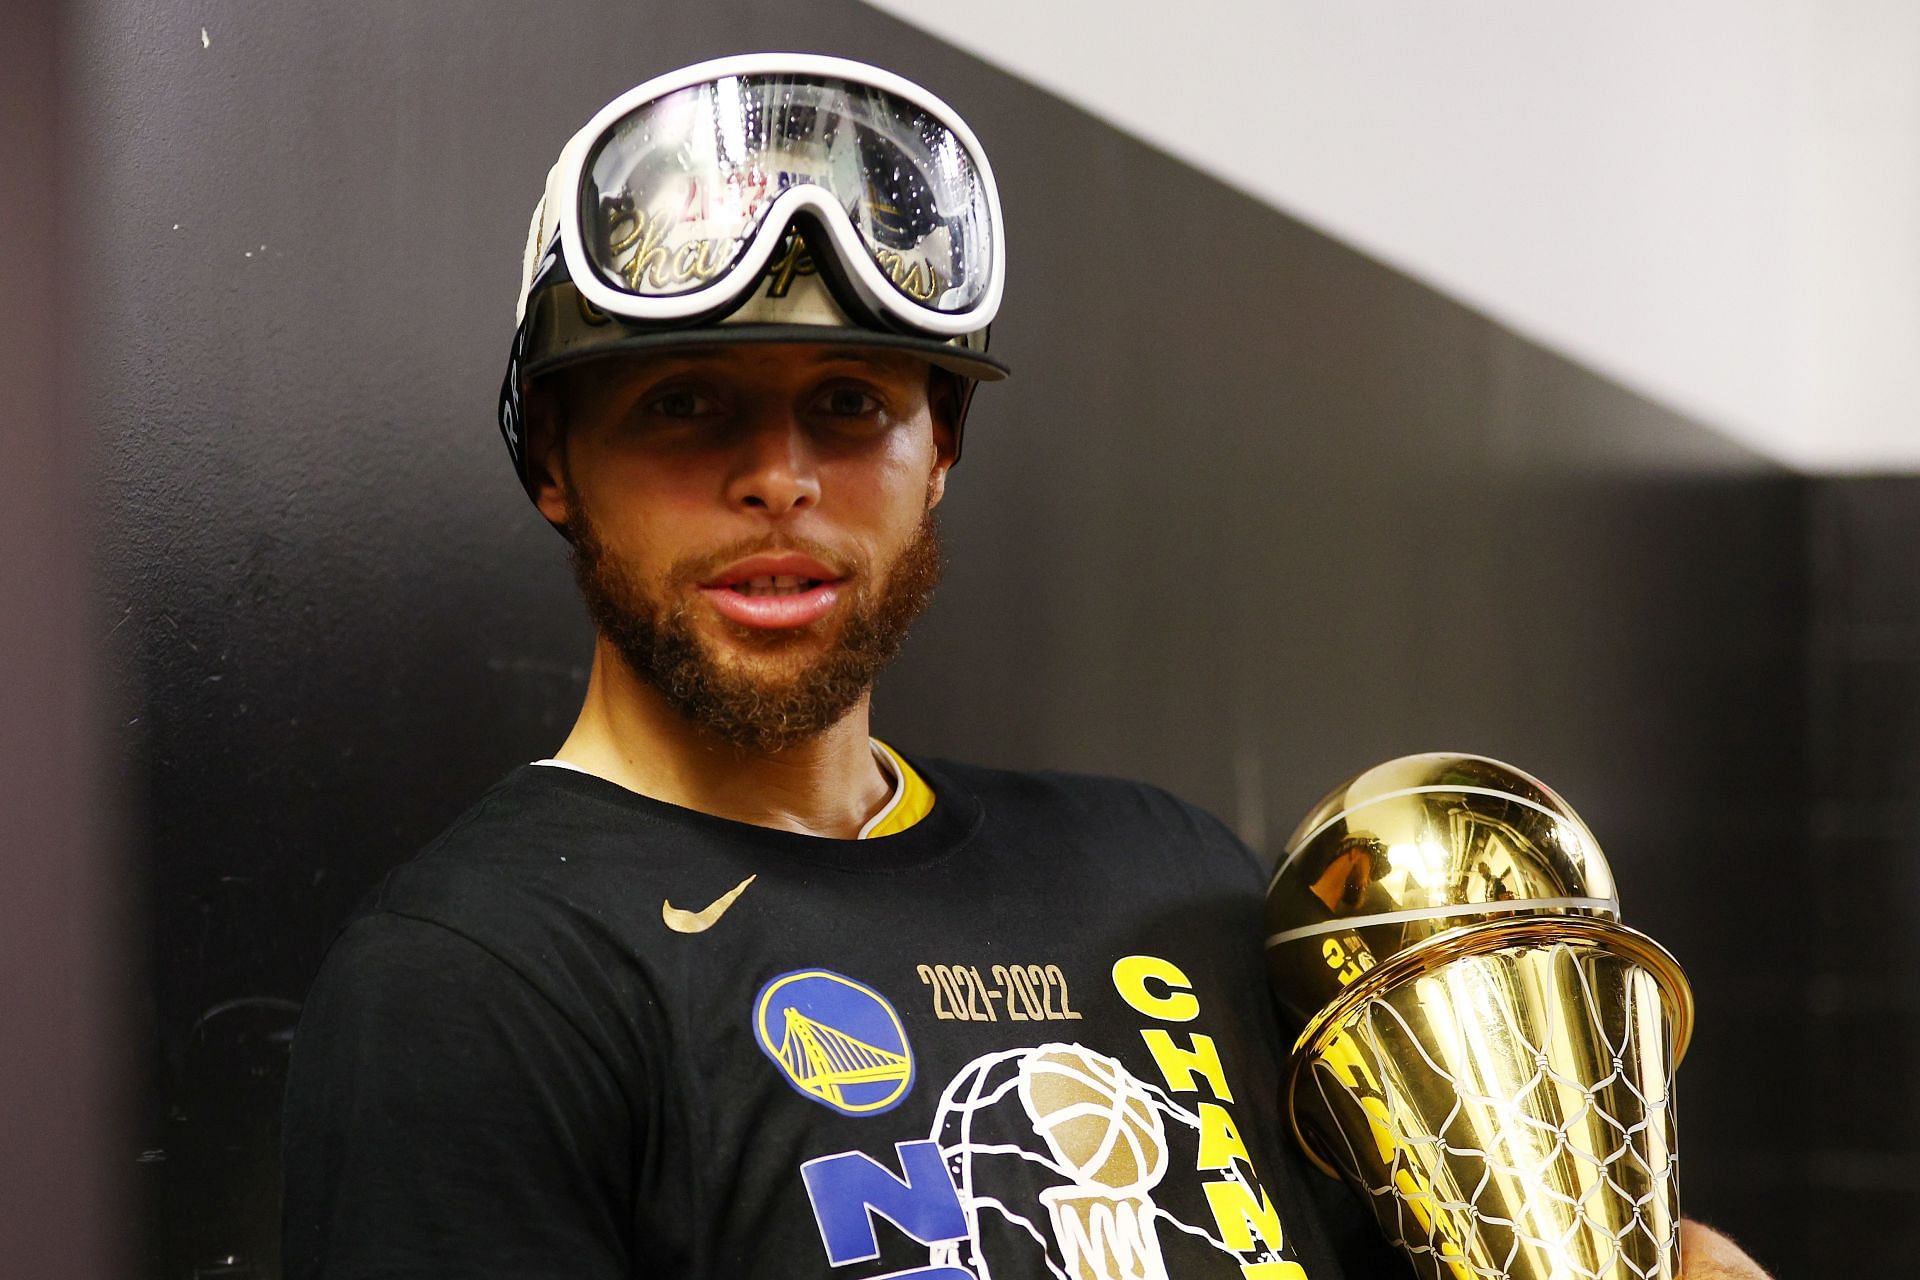 Steph Curry after winning his fourth NBA championship